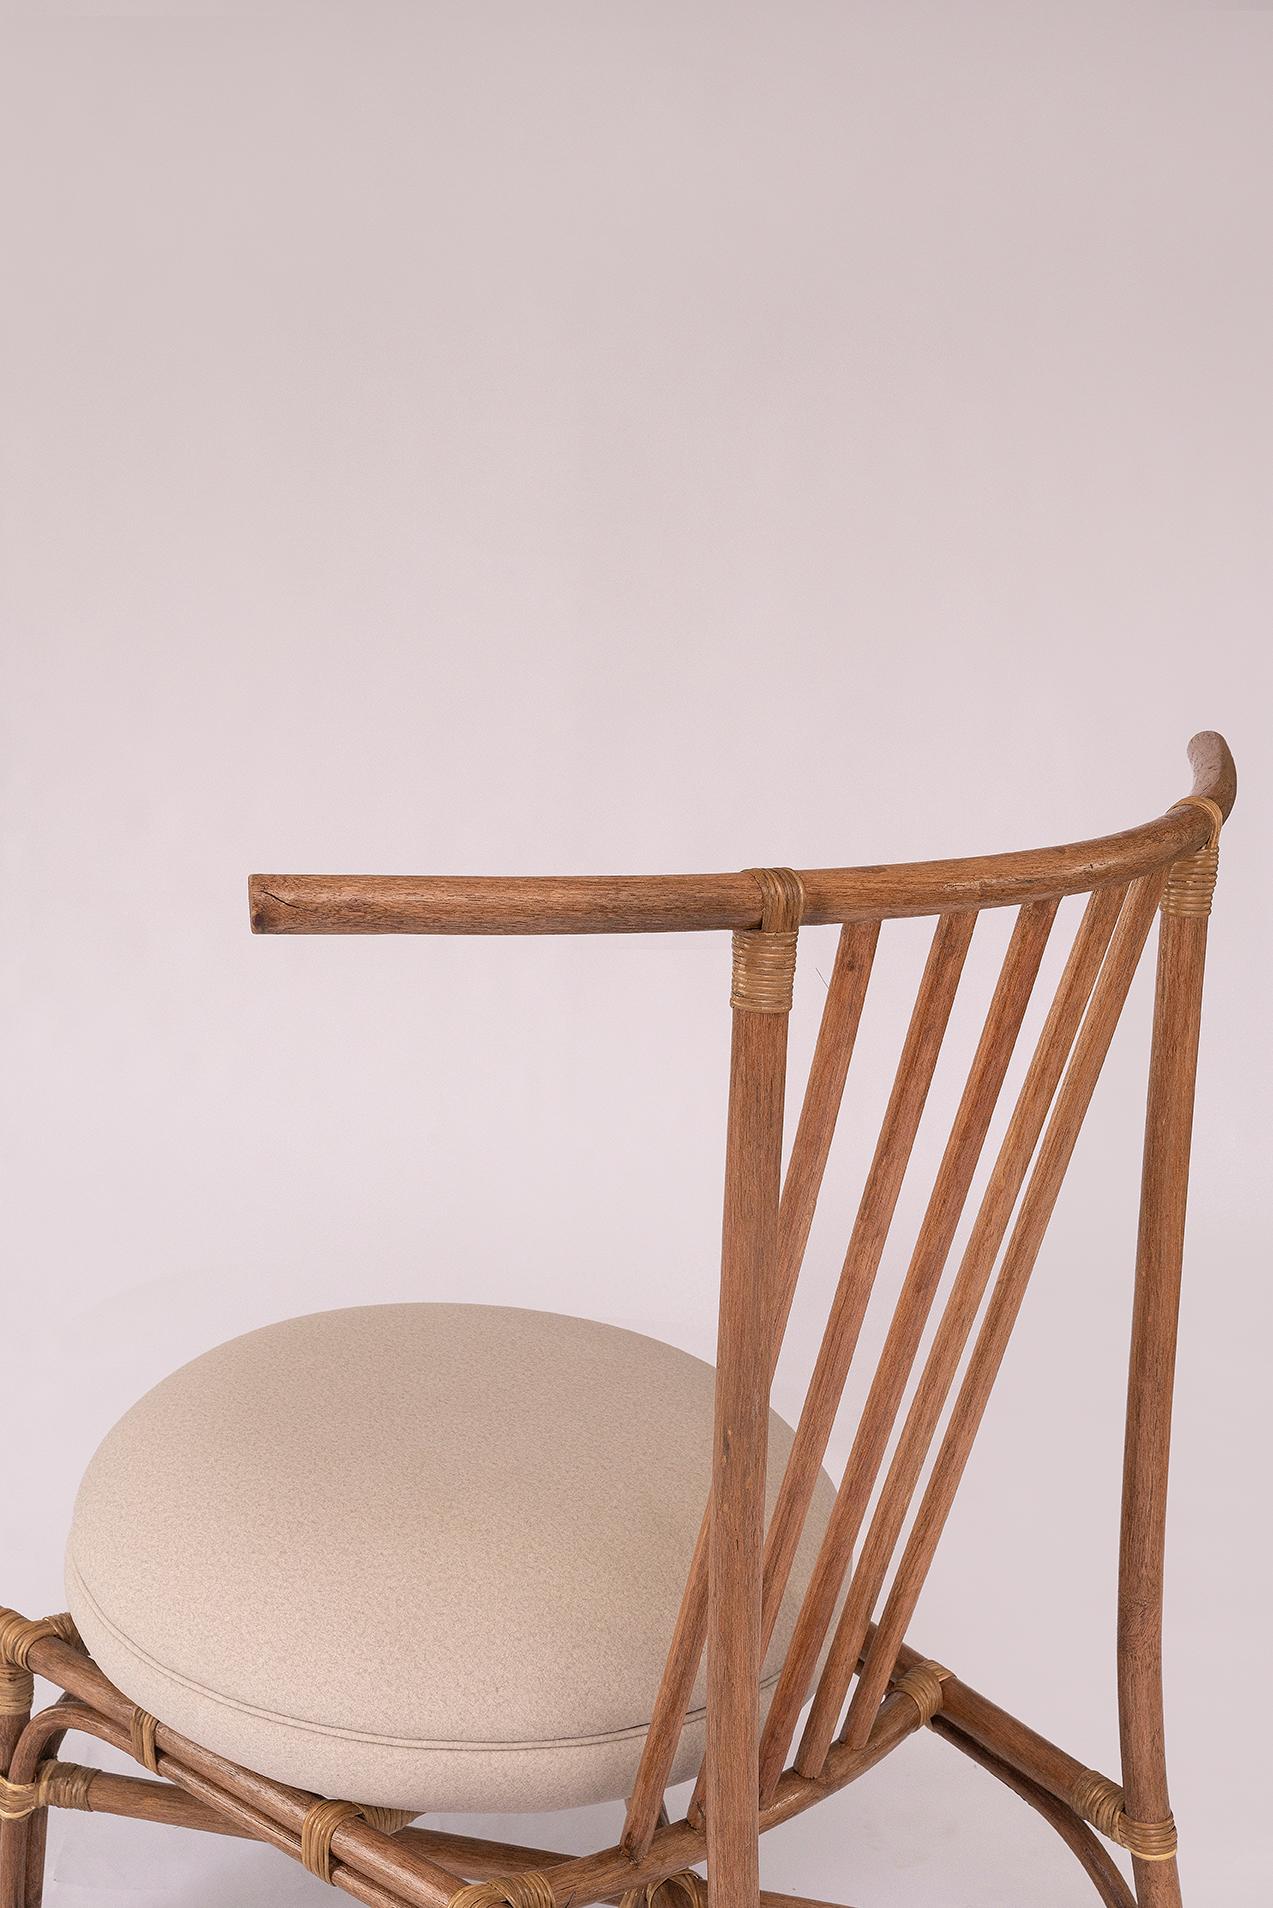 Toro armchair made in Apuí Amazon Vine and designed by Tiago Curioni For Sale 1